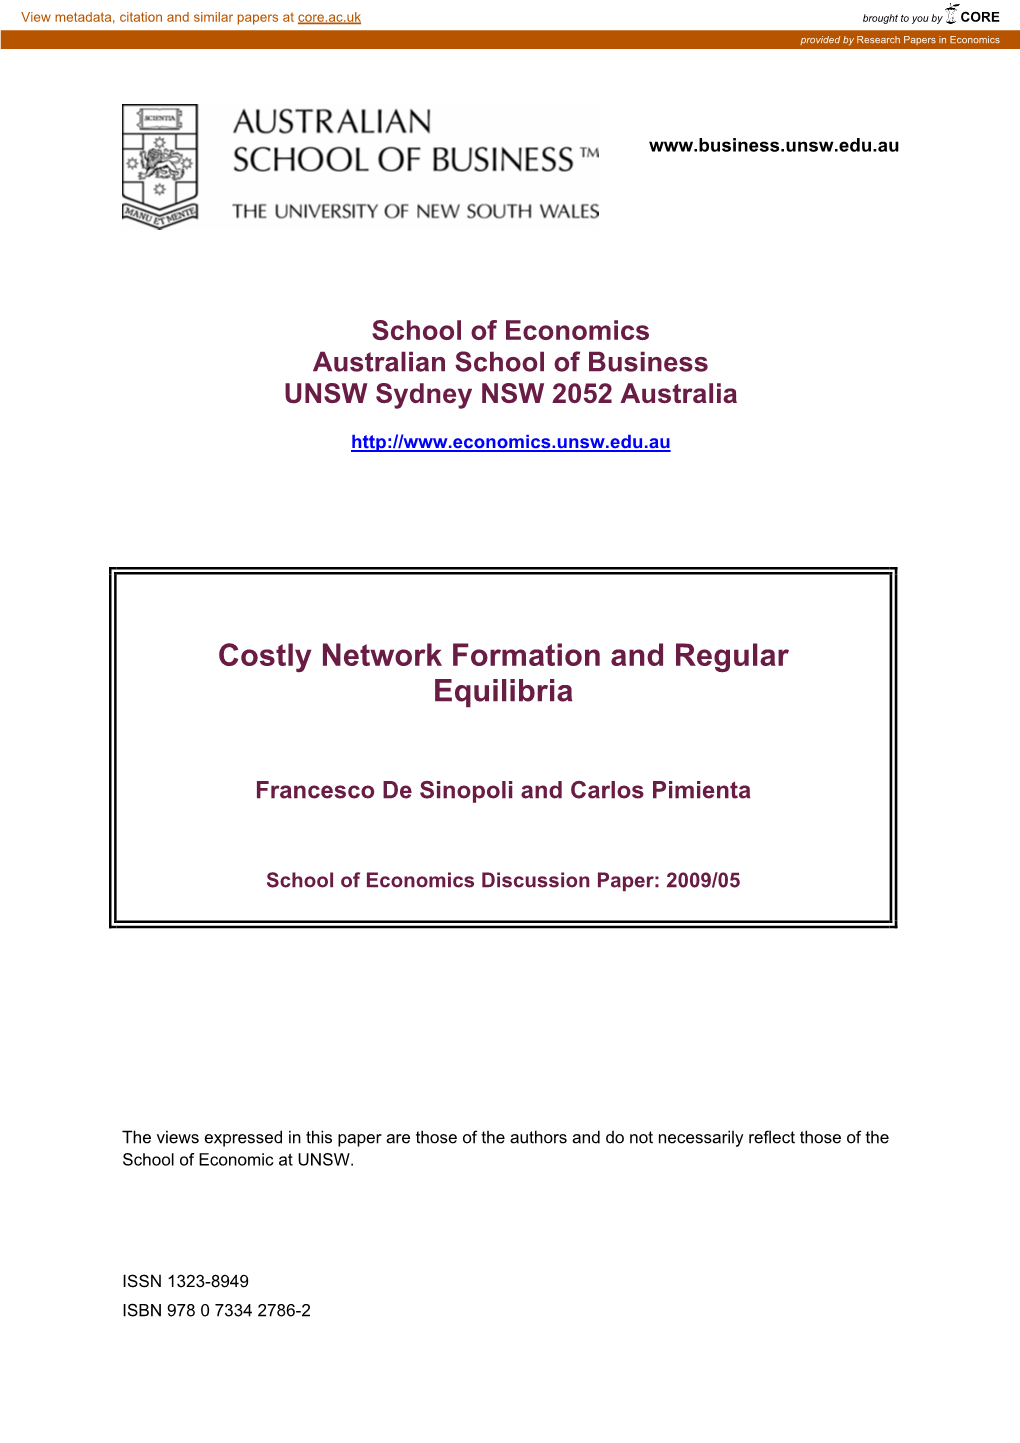 Costly Network Formation and Regular Equilibria